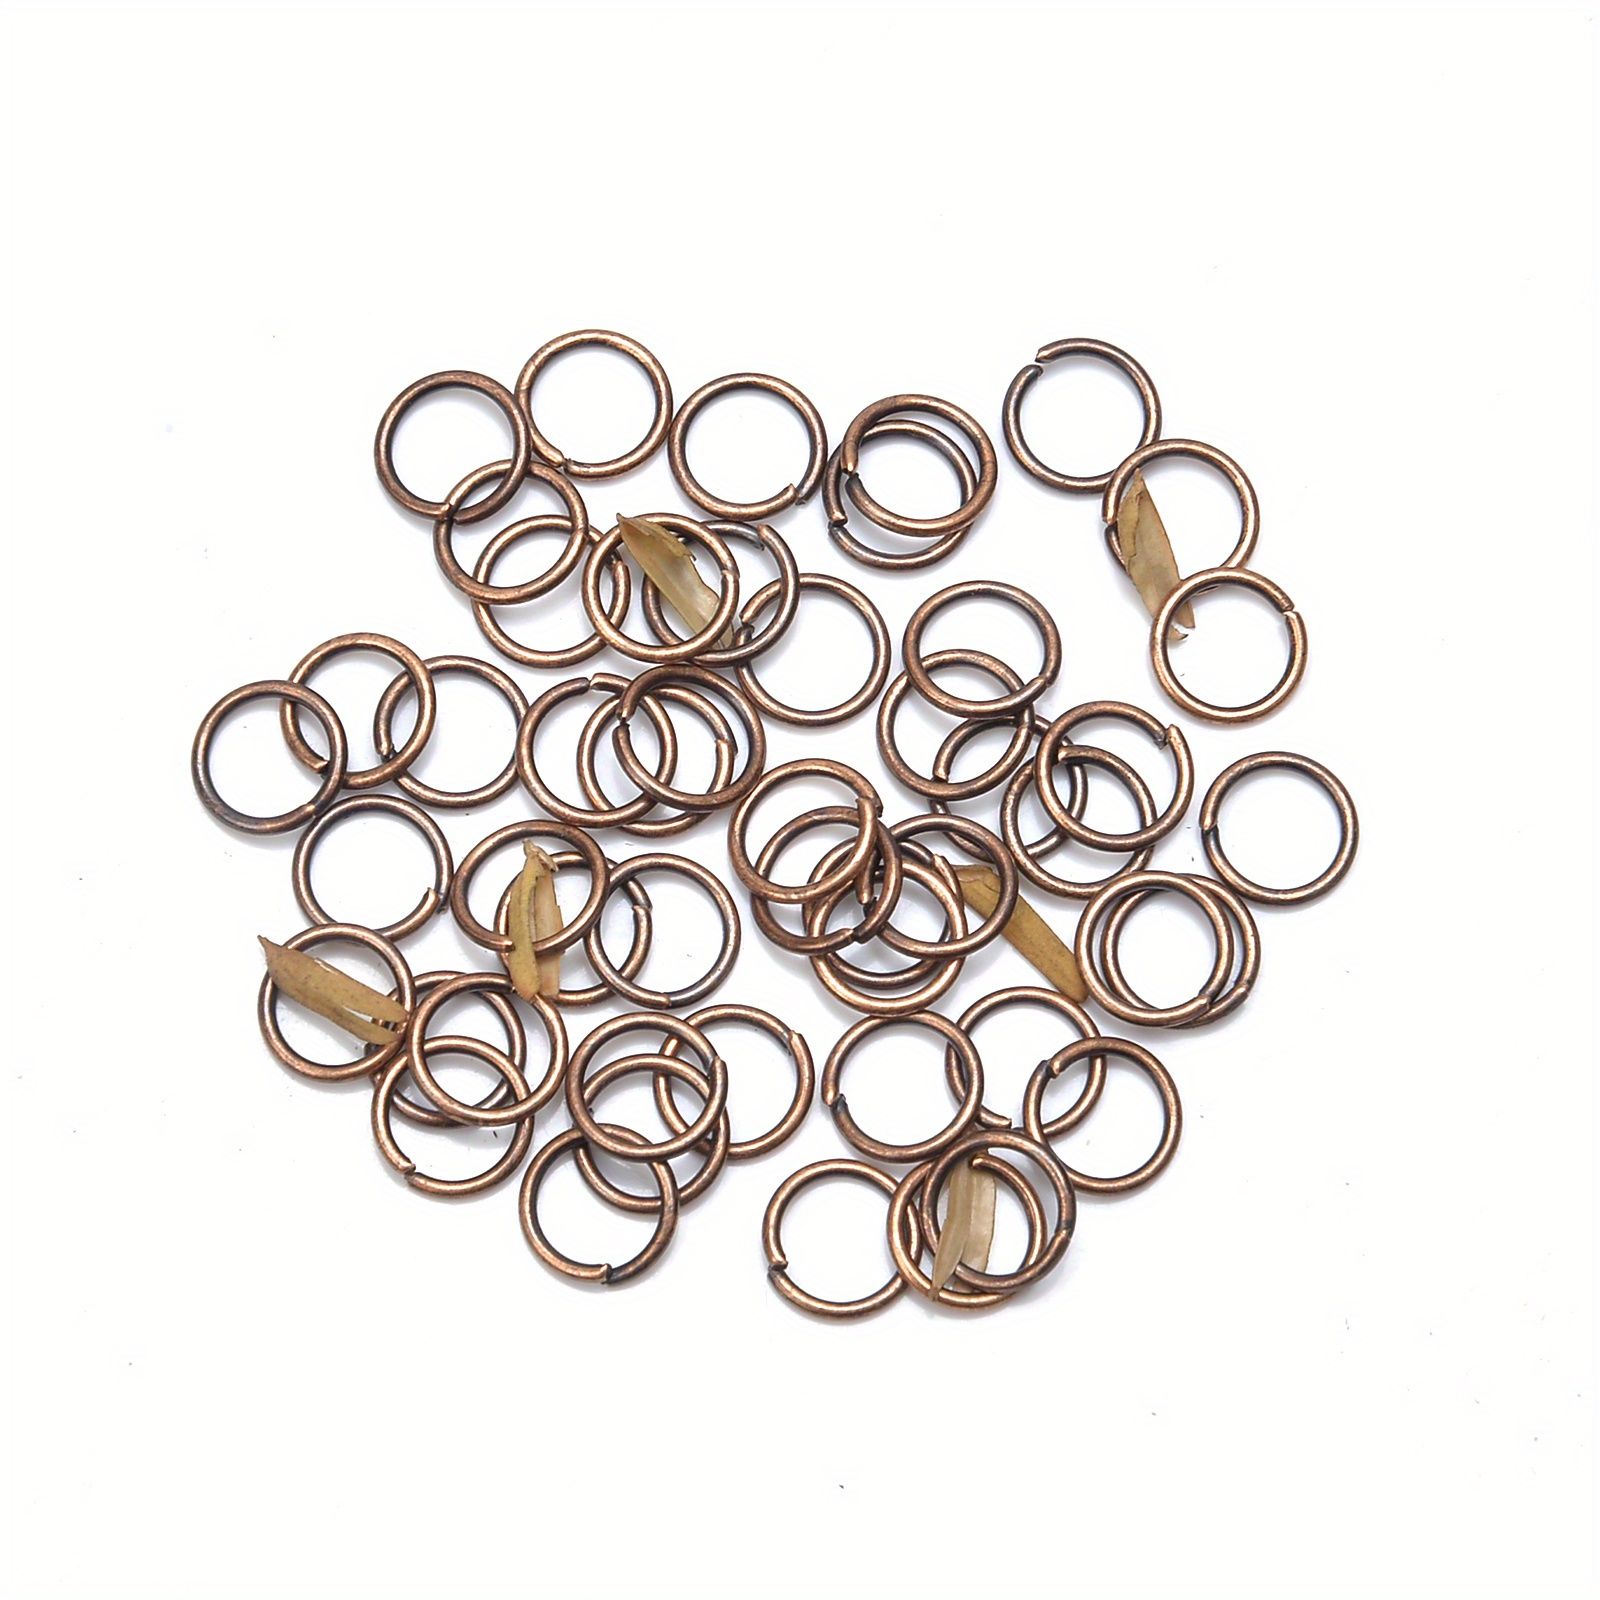 50-200pcs/lot 3-20 mm Jump Rings Split Rings Connectors For Diy Jewelry  Finding Making Accessories Wholesale Supplies